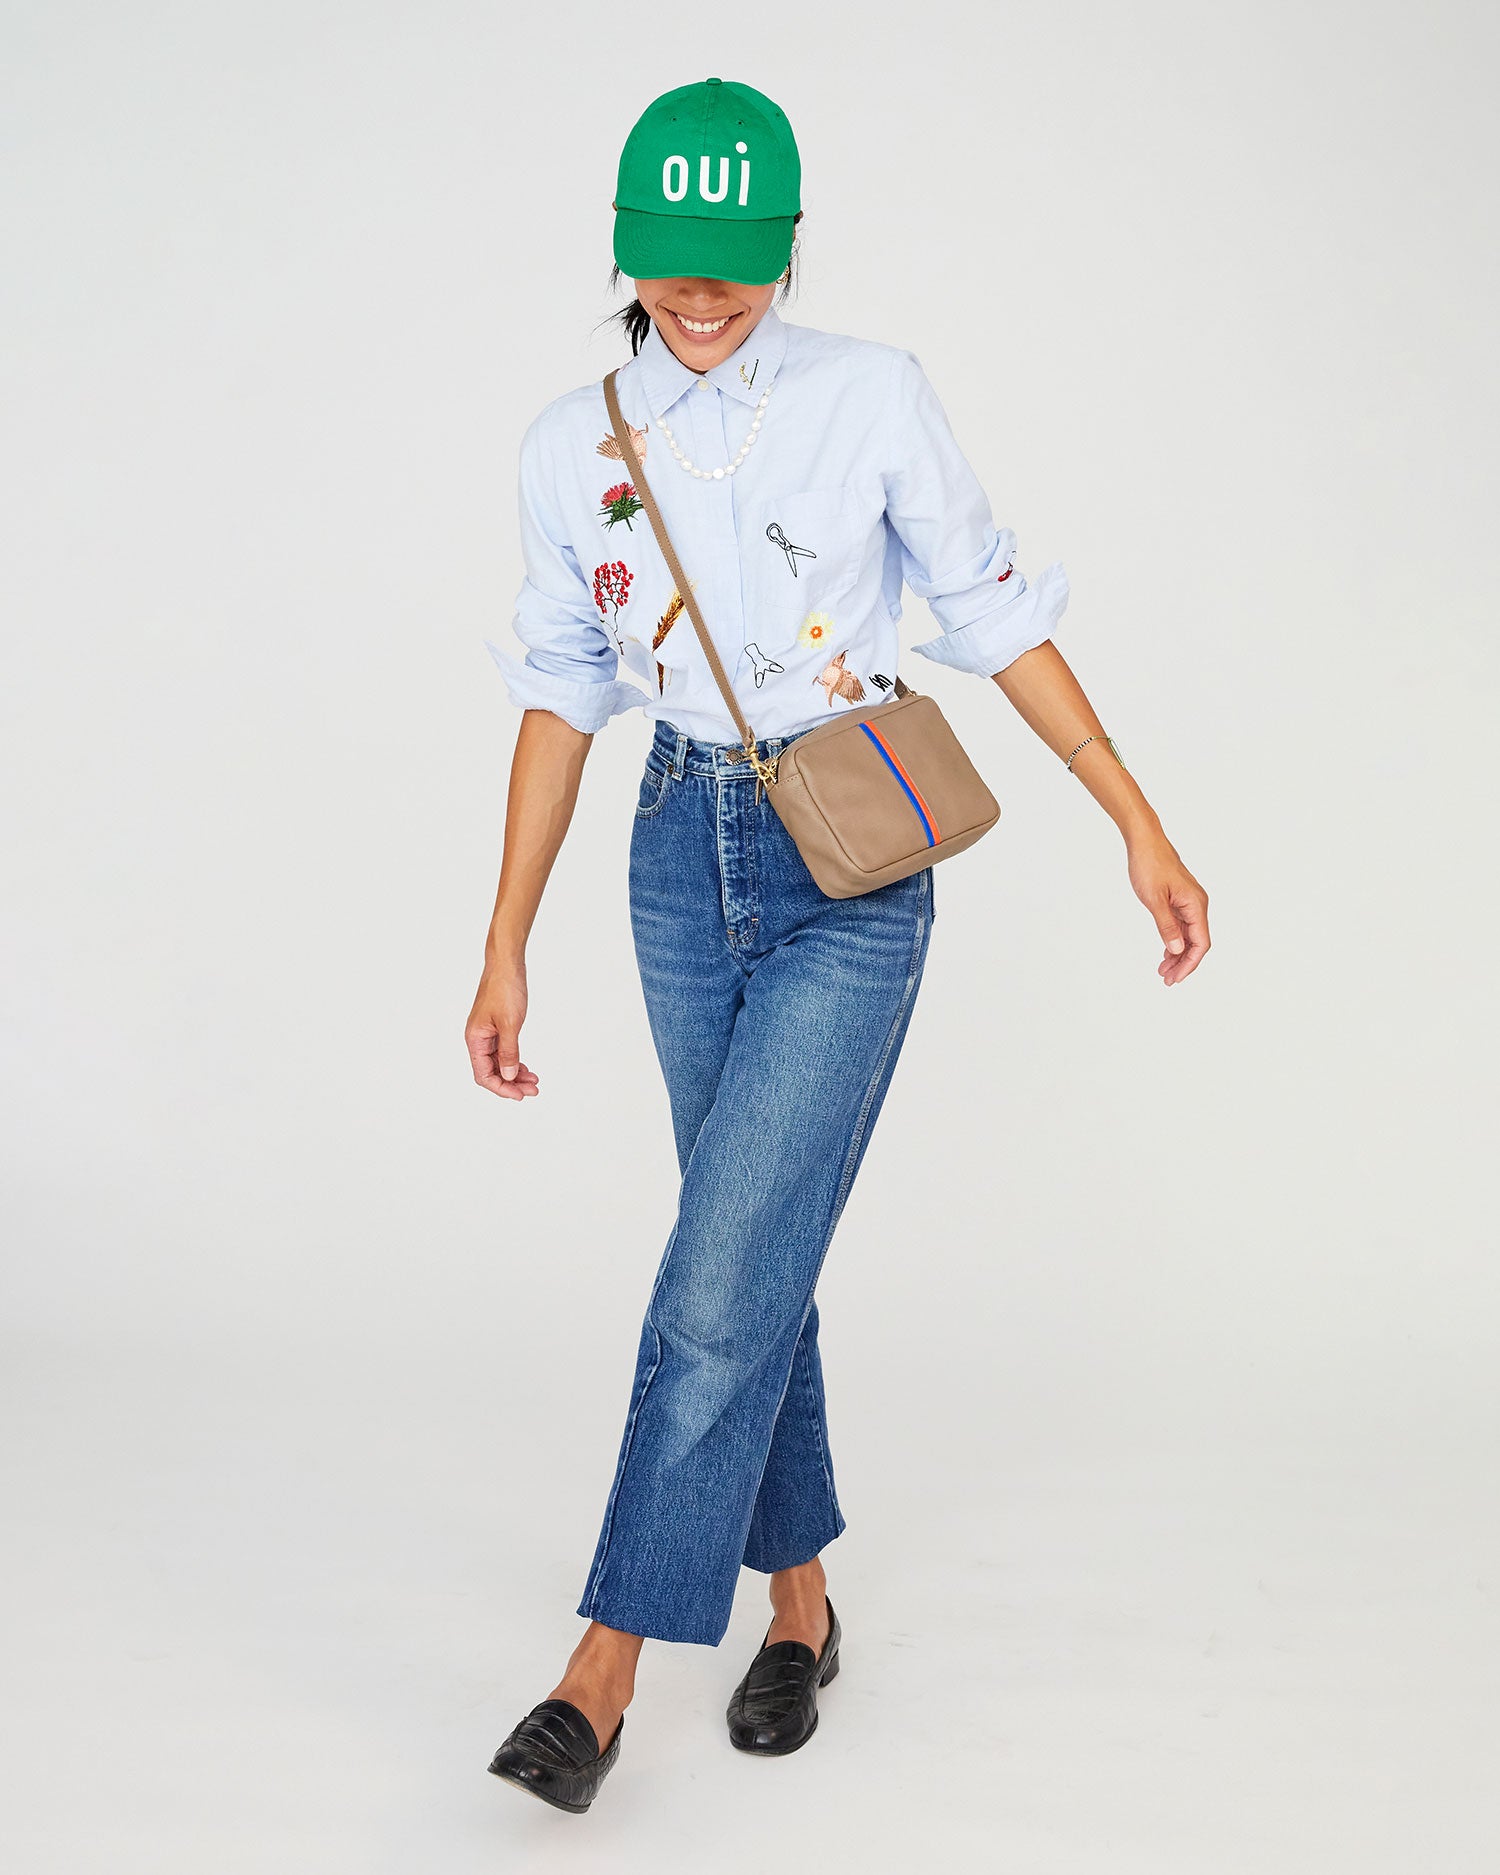 Sandra wearing the Green Oui Baseball Hat. she's wearing jeans and a button up shirt with the taupe mousse midi sac worn crossbody